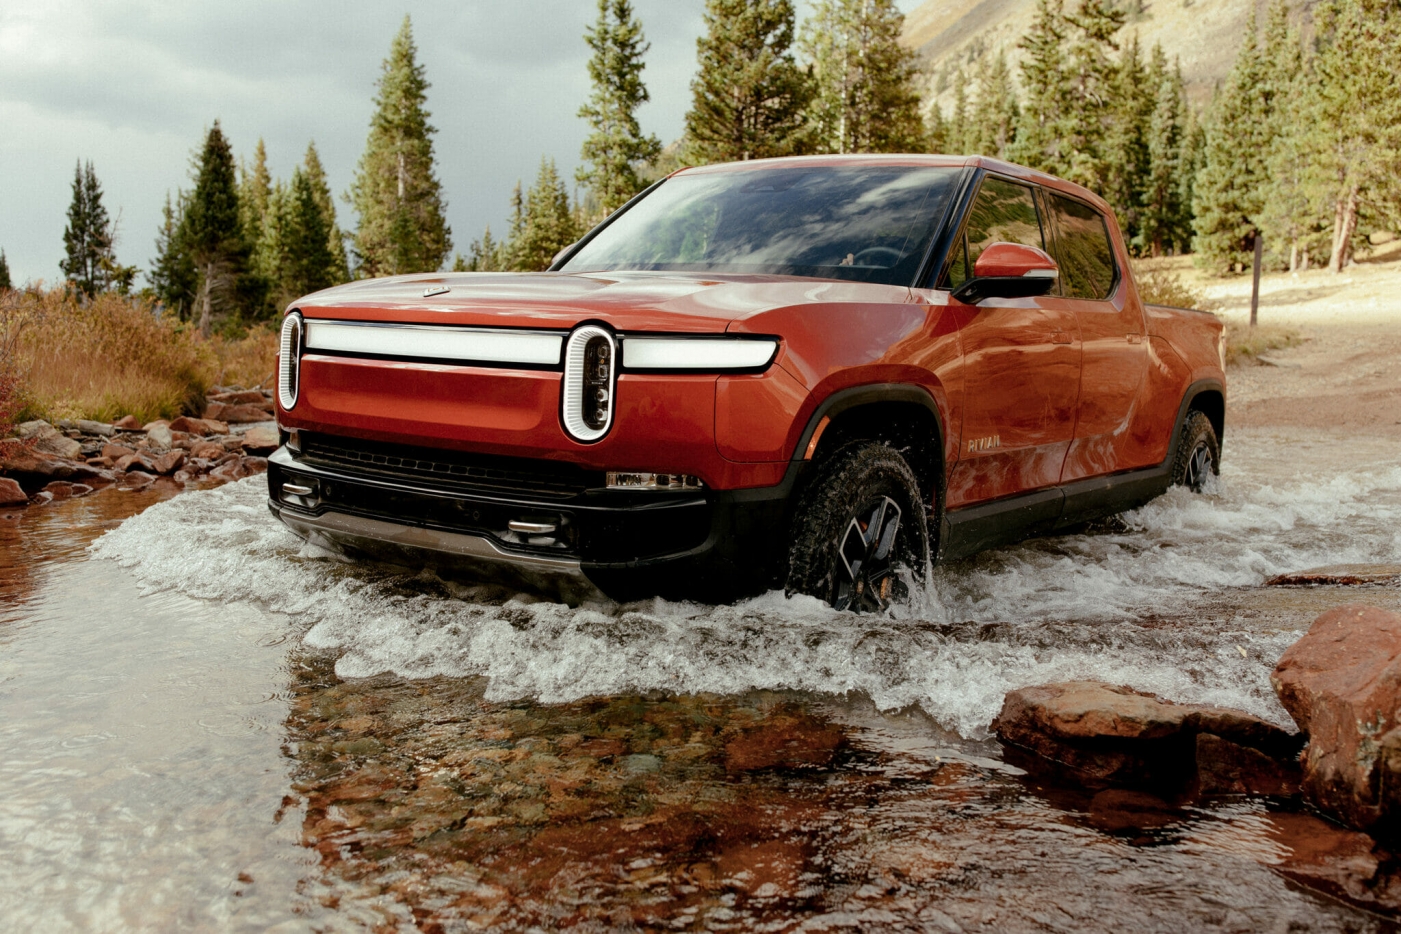 Electric vehicle startup Rivian is now a publicly traded company after